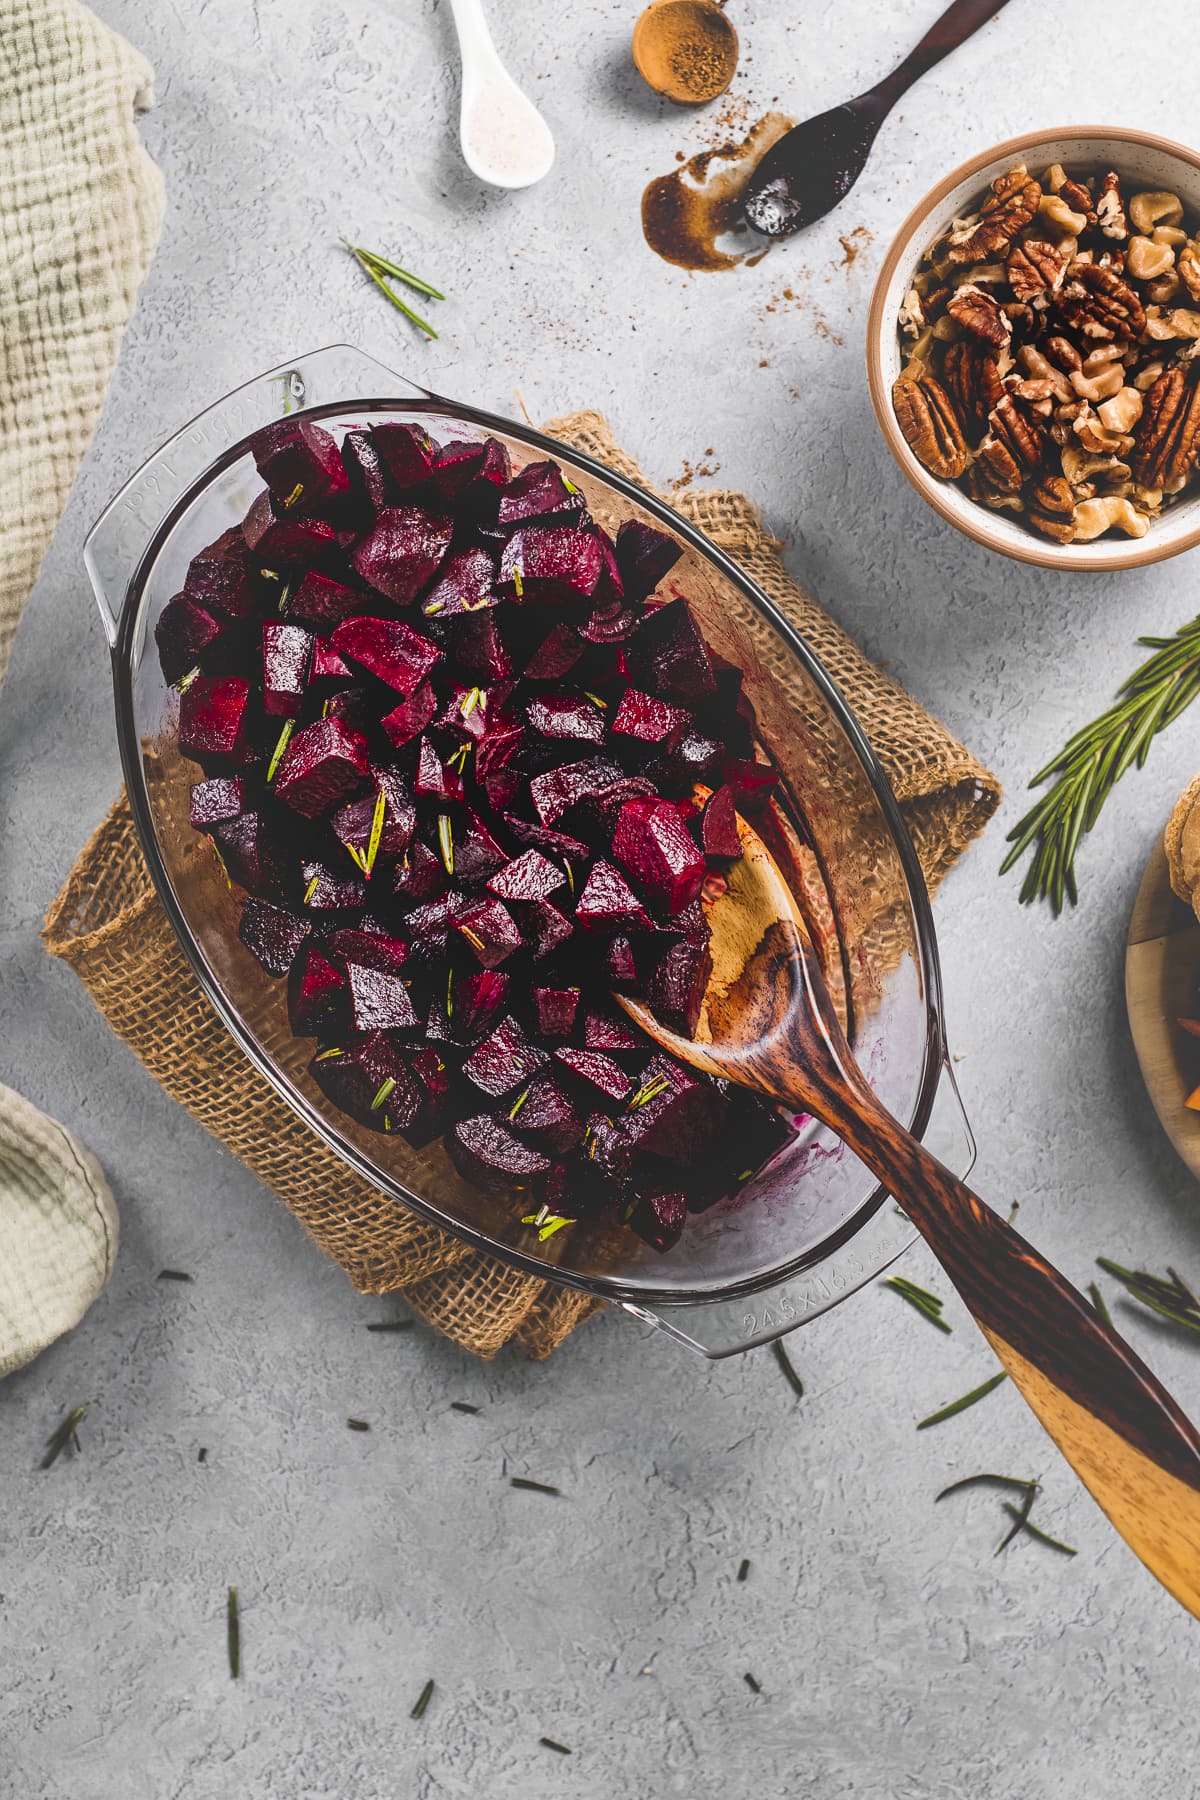 A roasting dish with baked balsamic glazed beets topped with fresh rosemary.